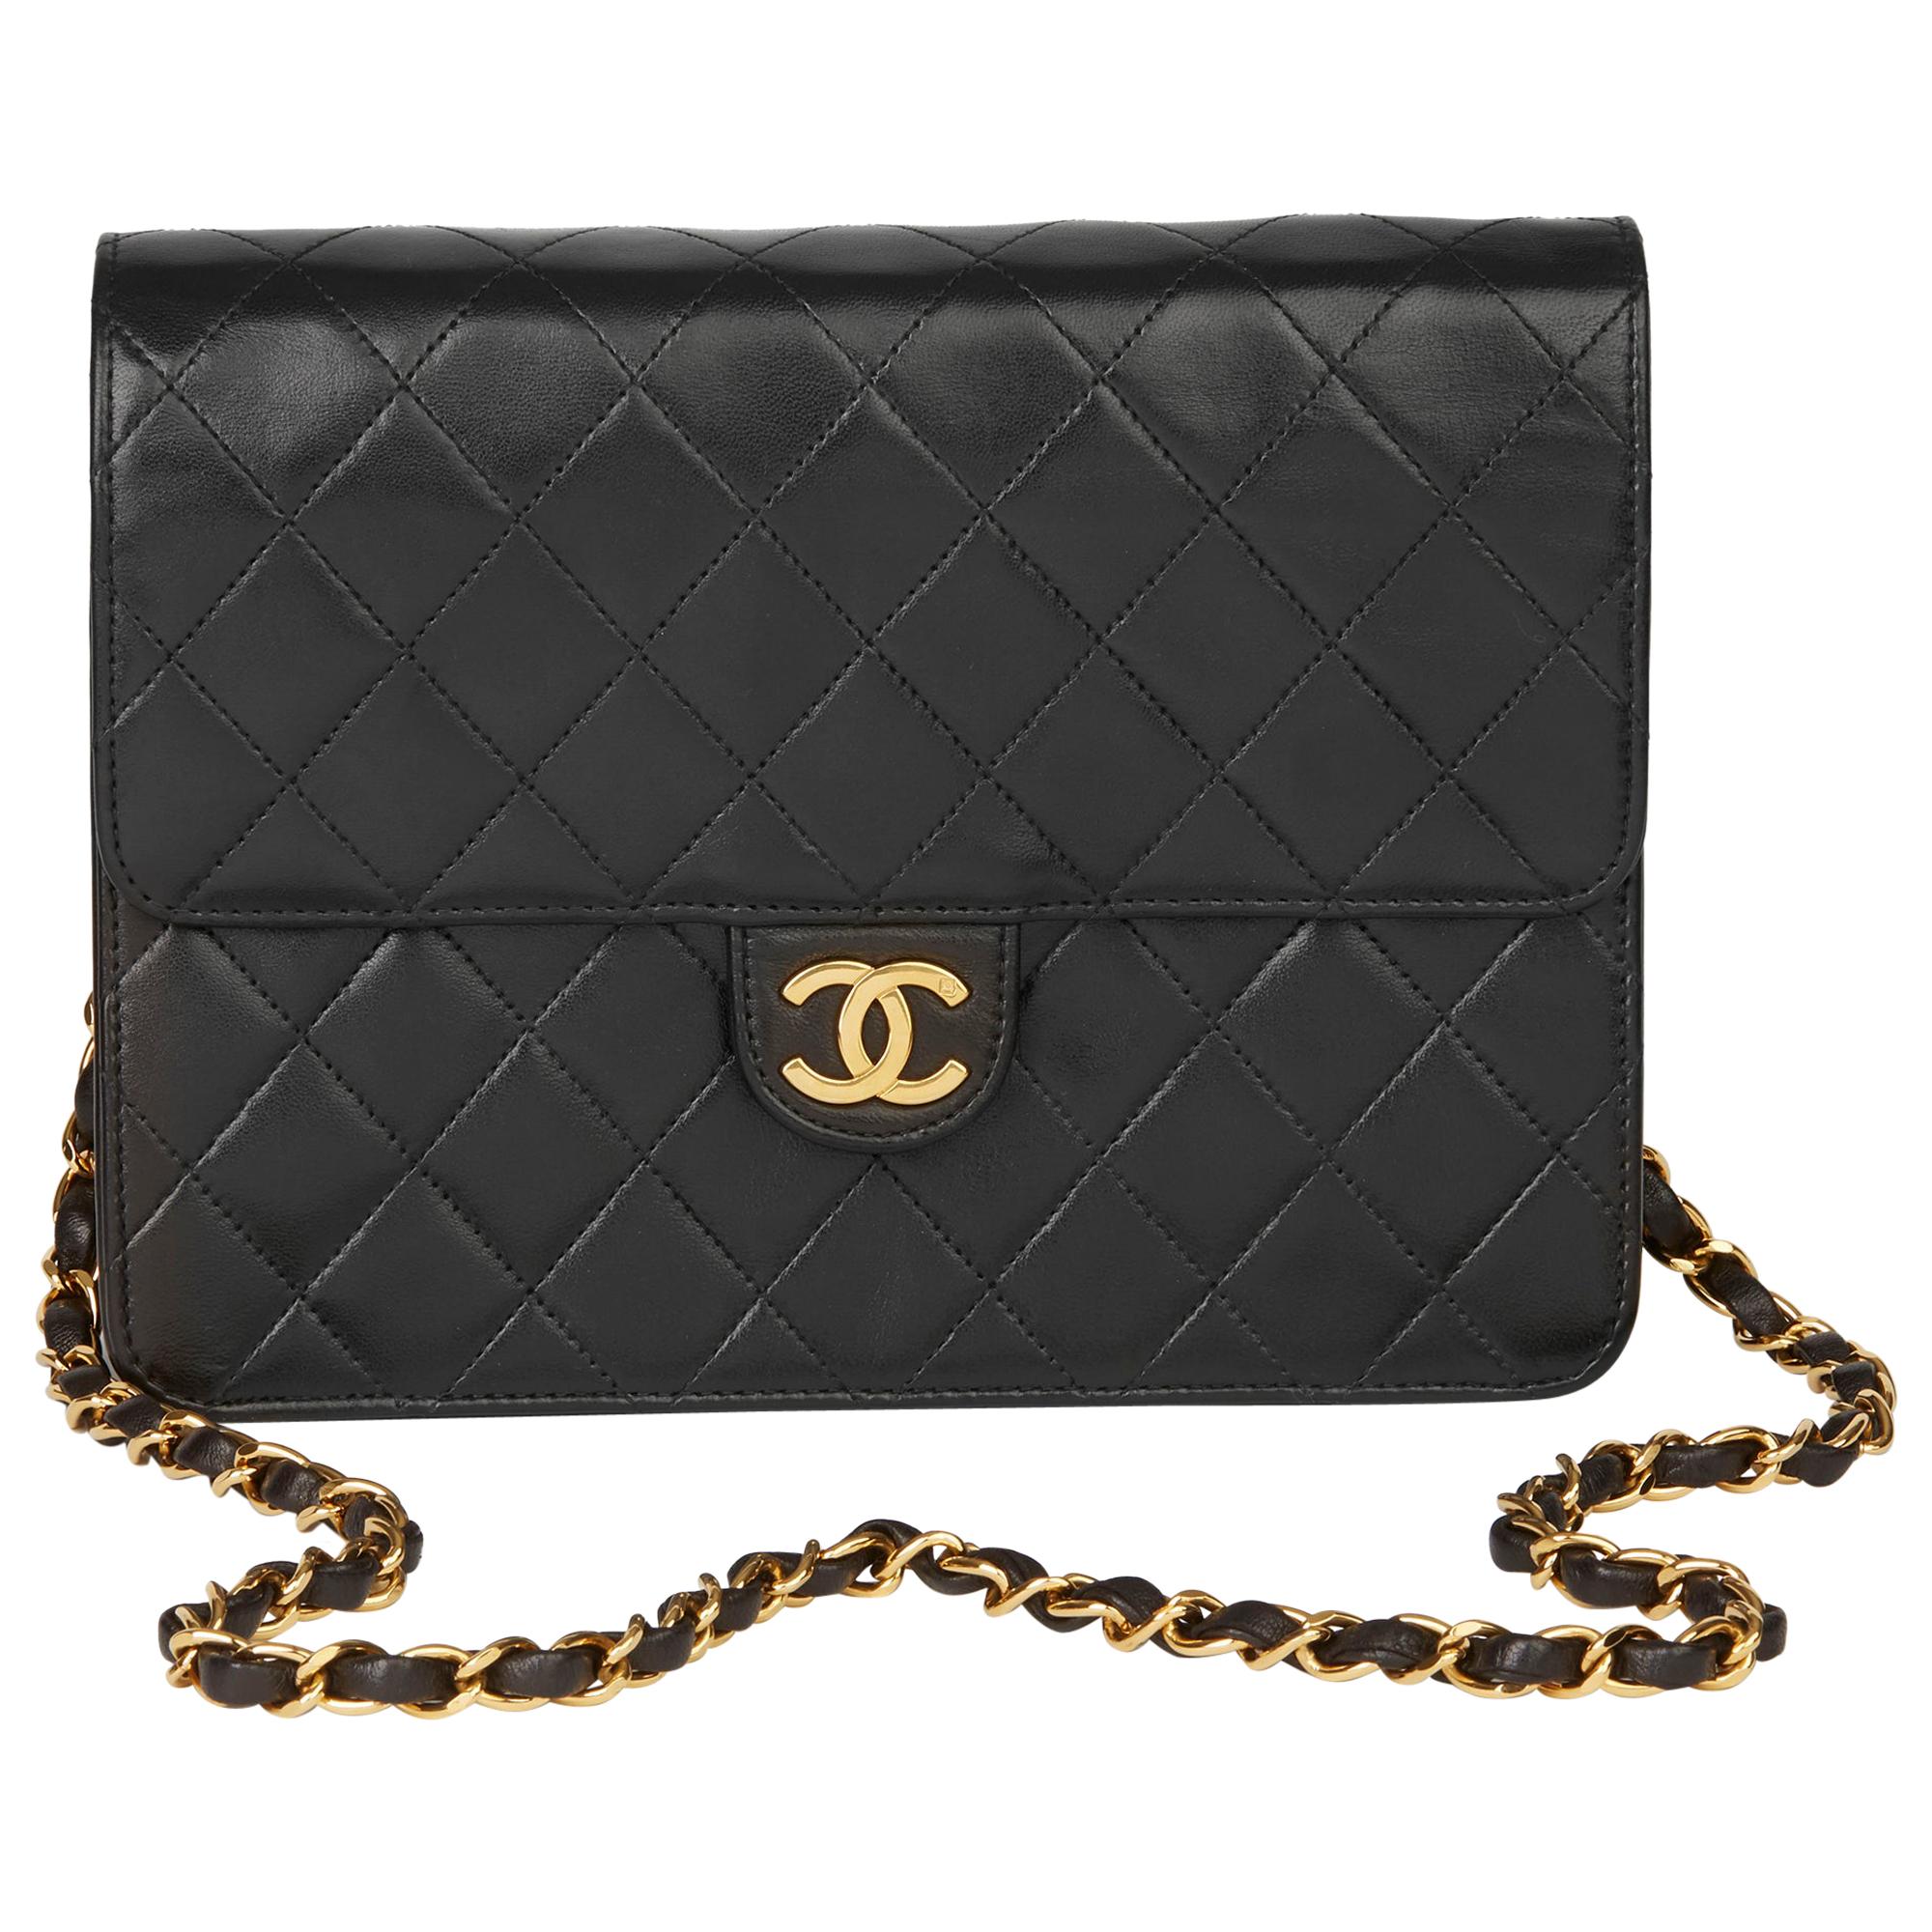 1994 Chanel Black Quilted Lambskin Vintage Small Classic Single Flap Bag